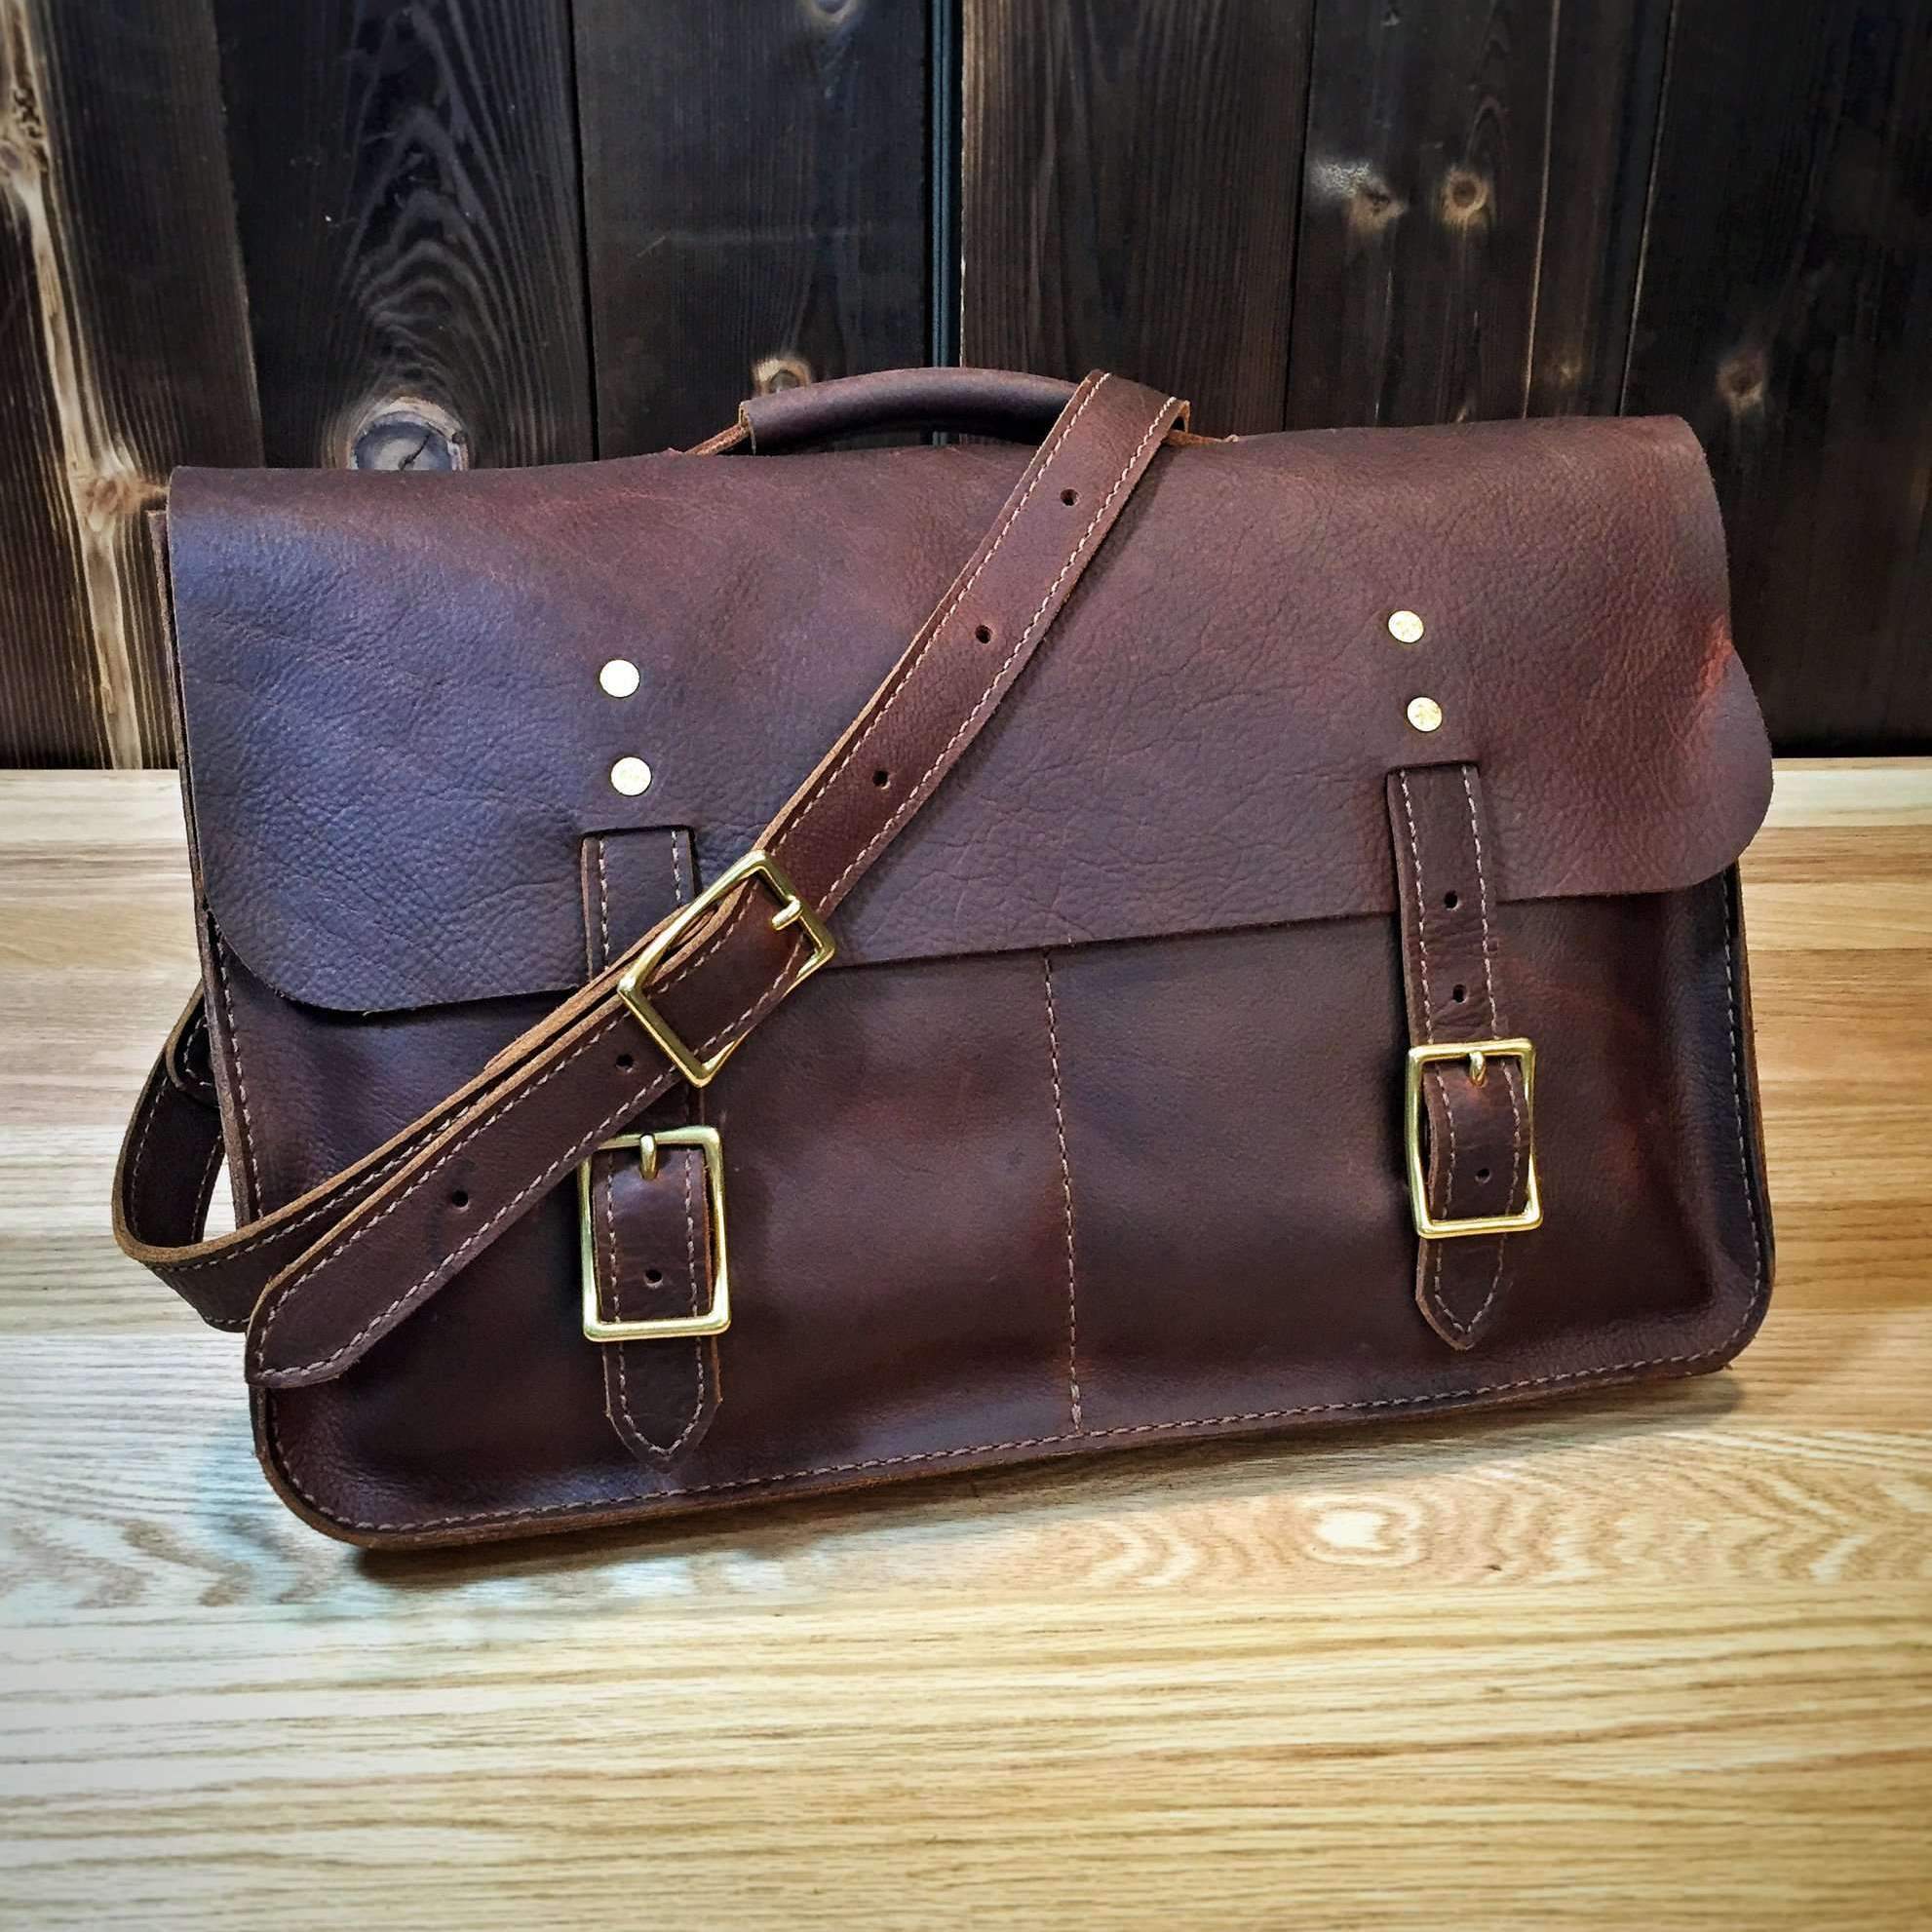 Classic Odin Satchel in Brown Worn Saddle – Odin Leather Goods